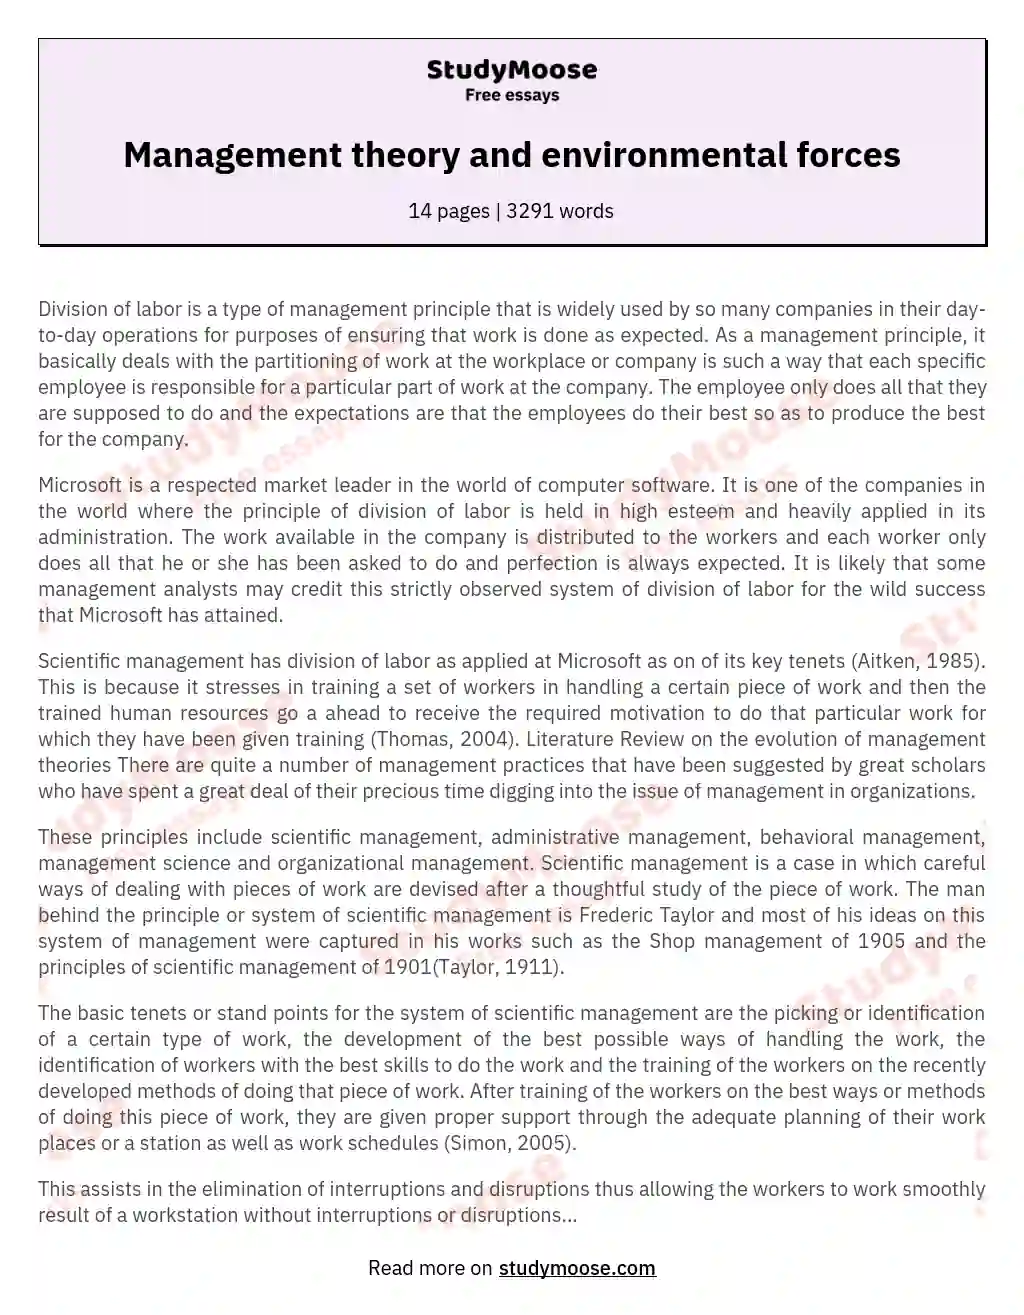 Management theory and environmental forces essay